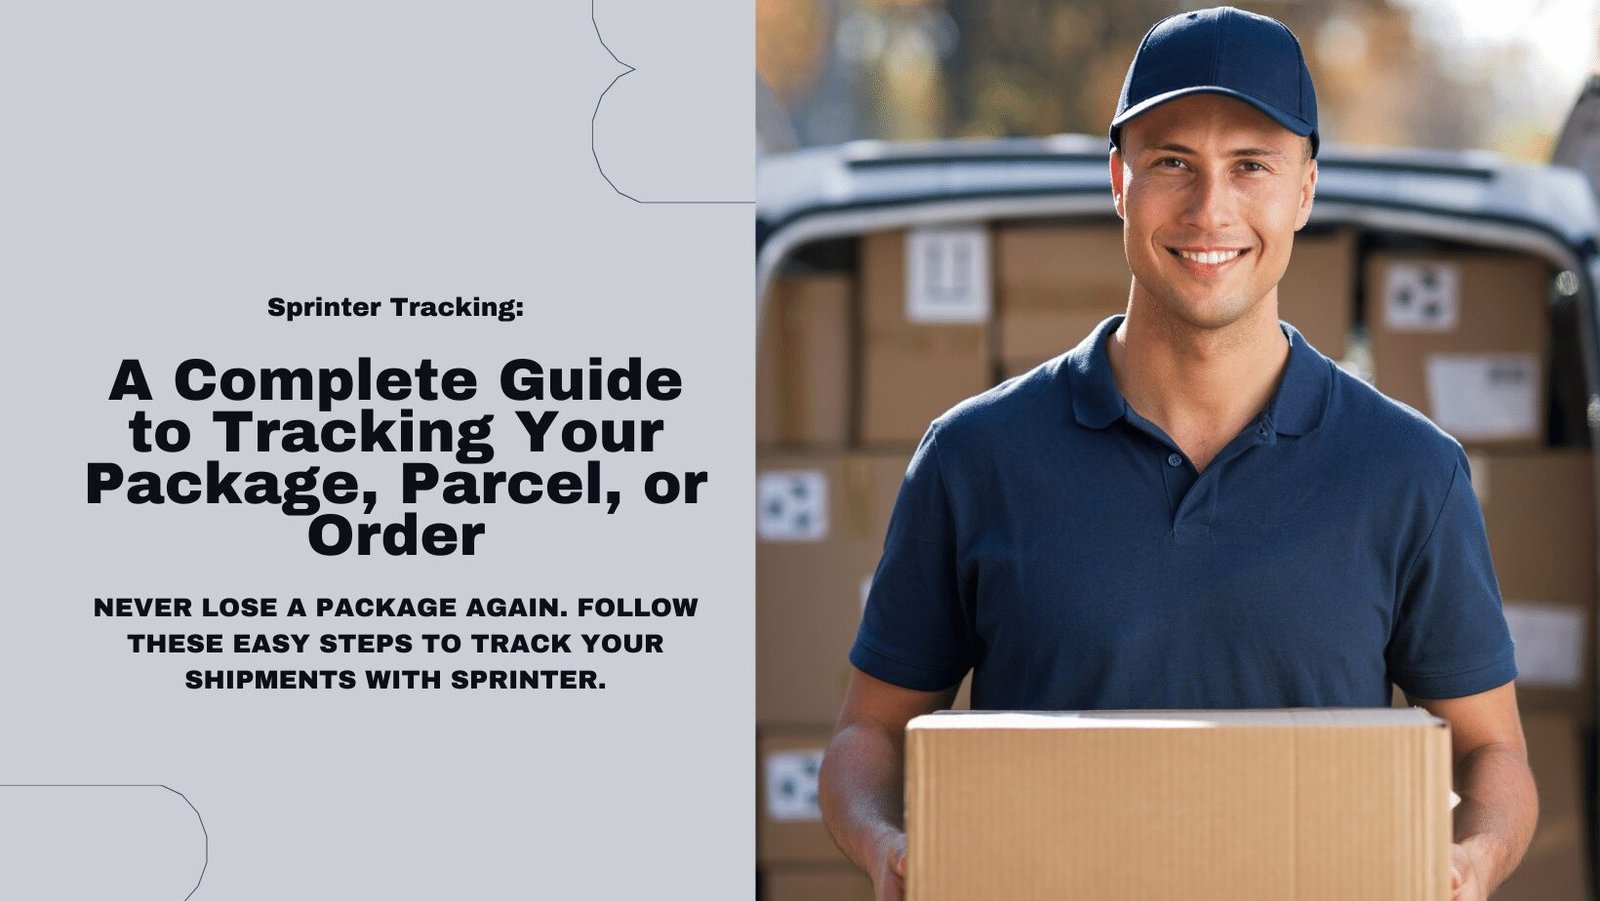 Sprinter Tracking A Complete Guide to Track Your Package, Parcel, or Order